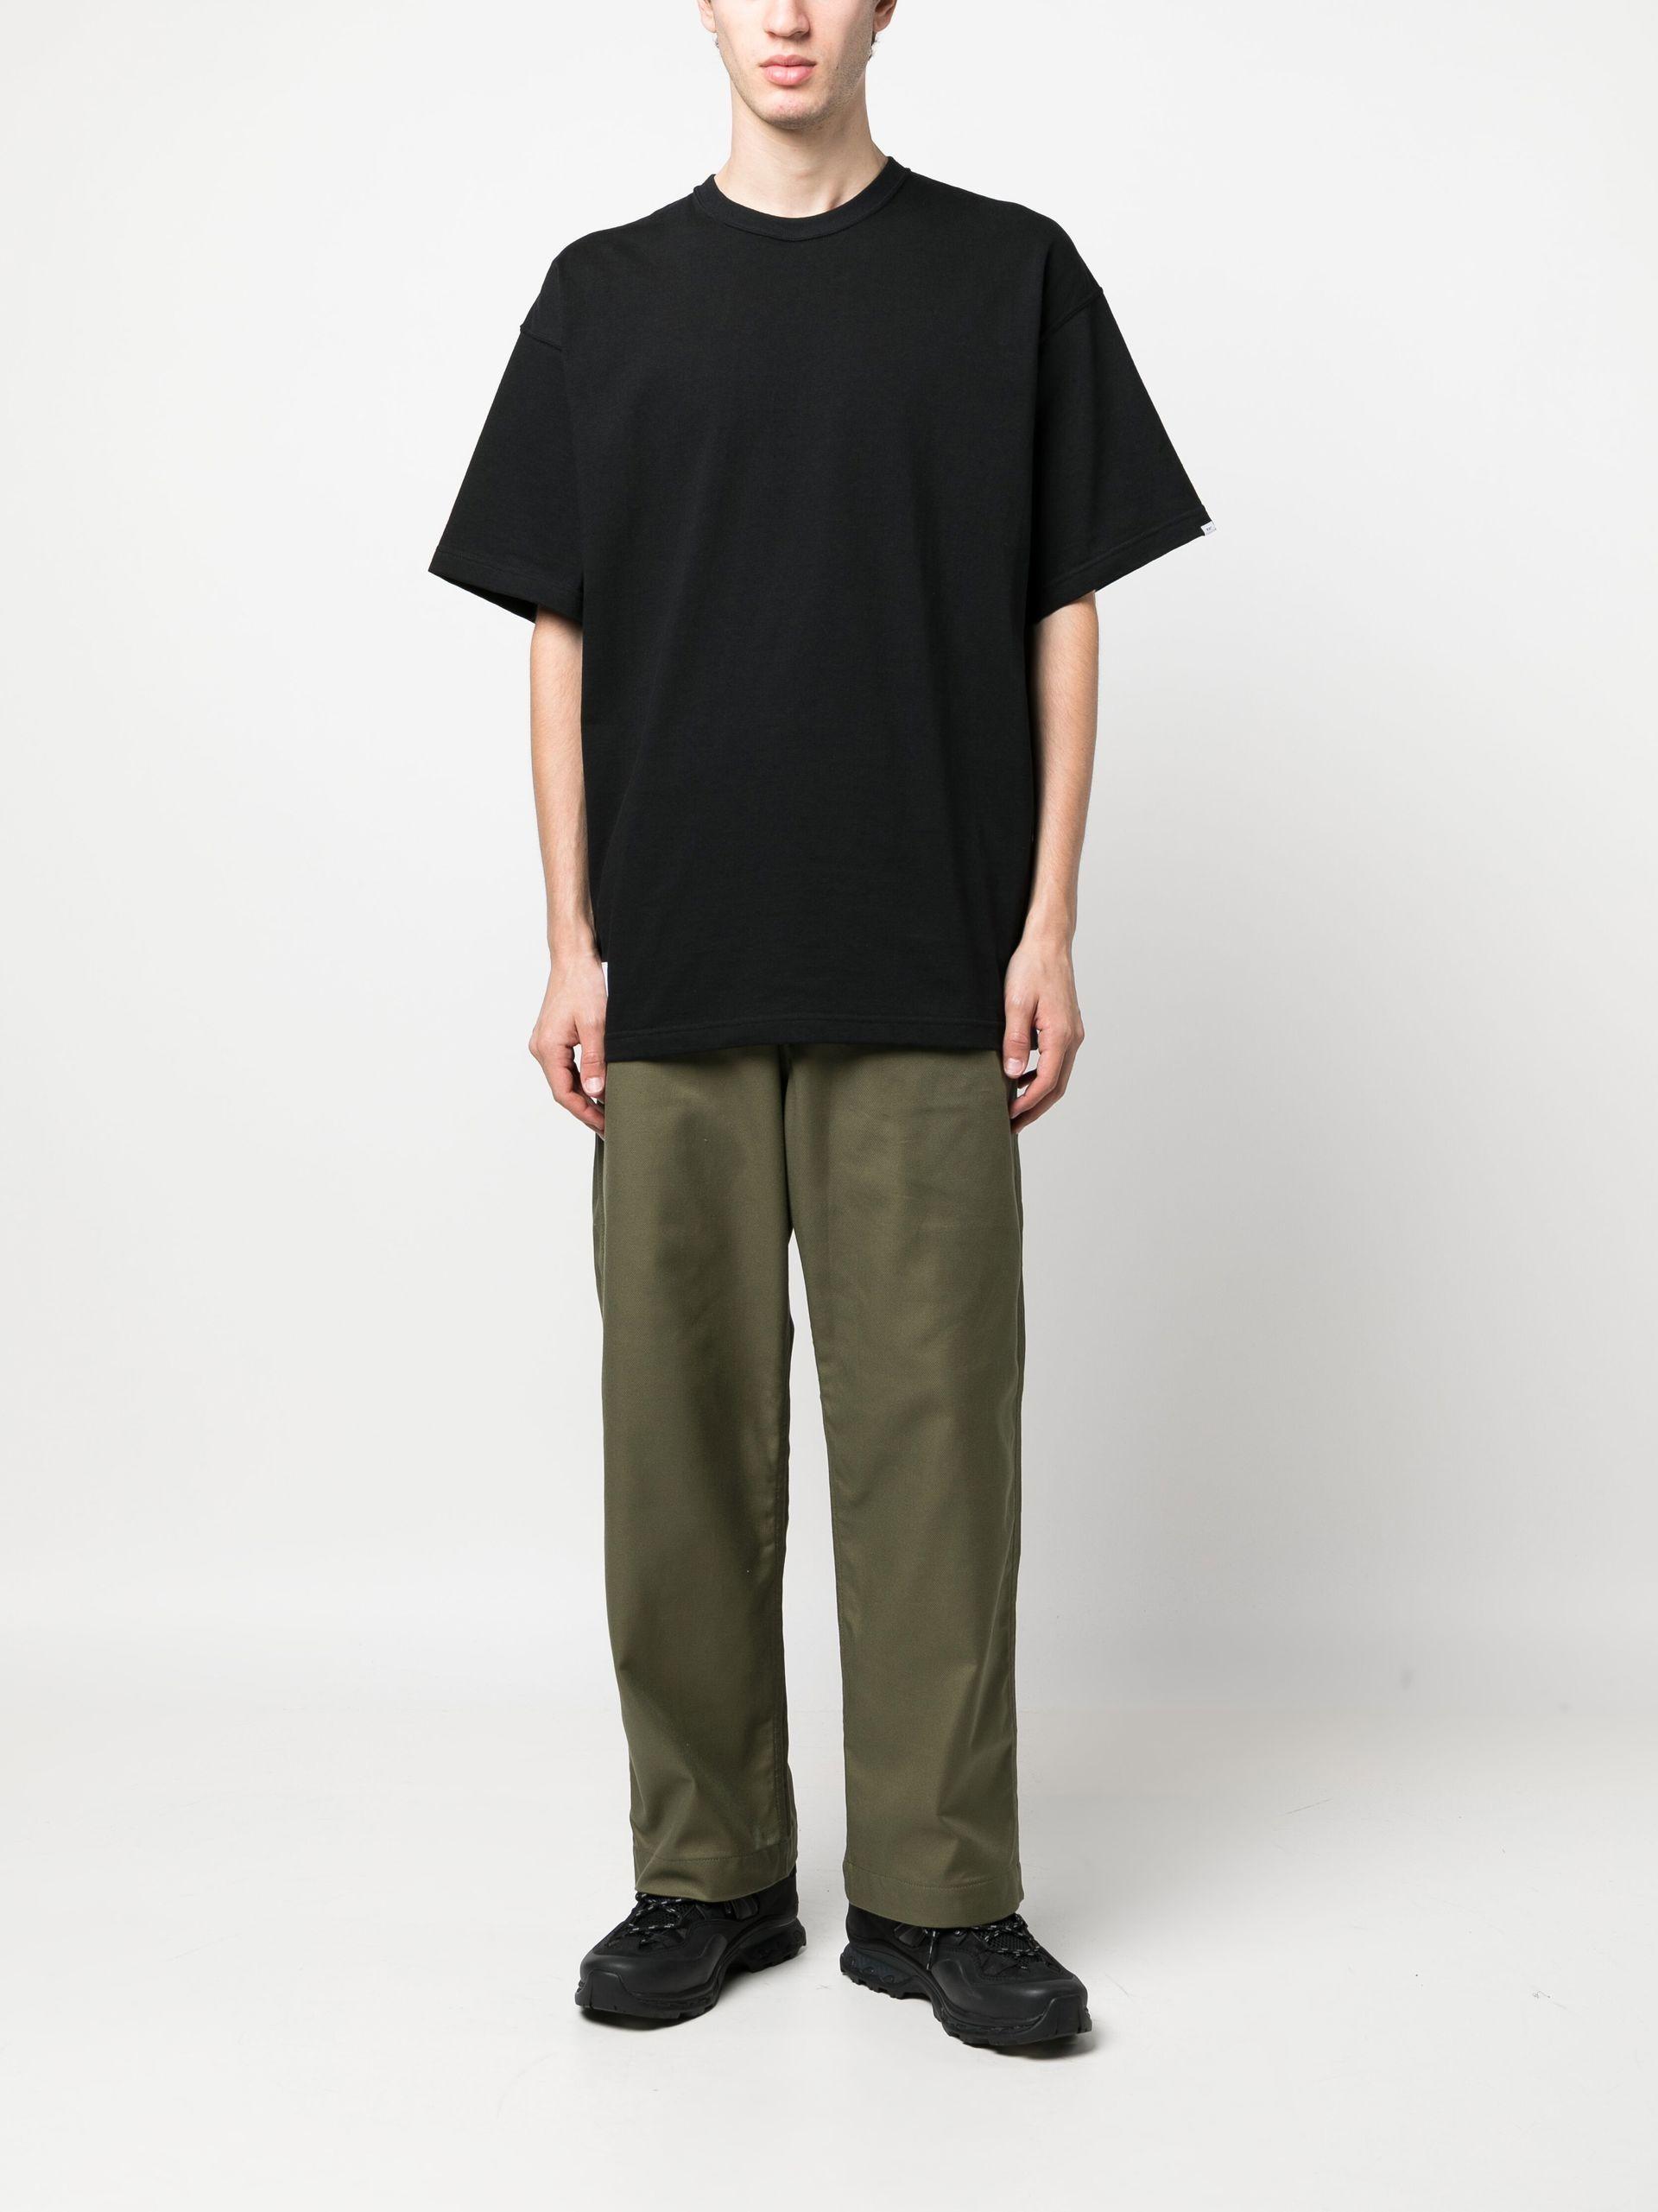 WTAPS BEND TROUSERS POLY. TWILL ネイバーフッド-silversky